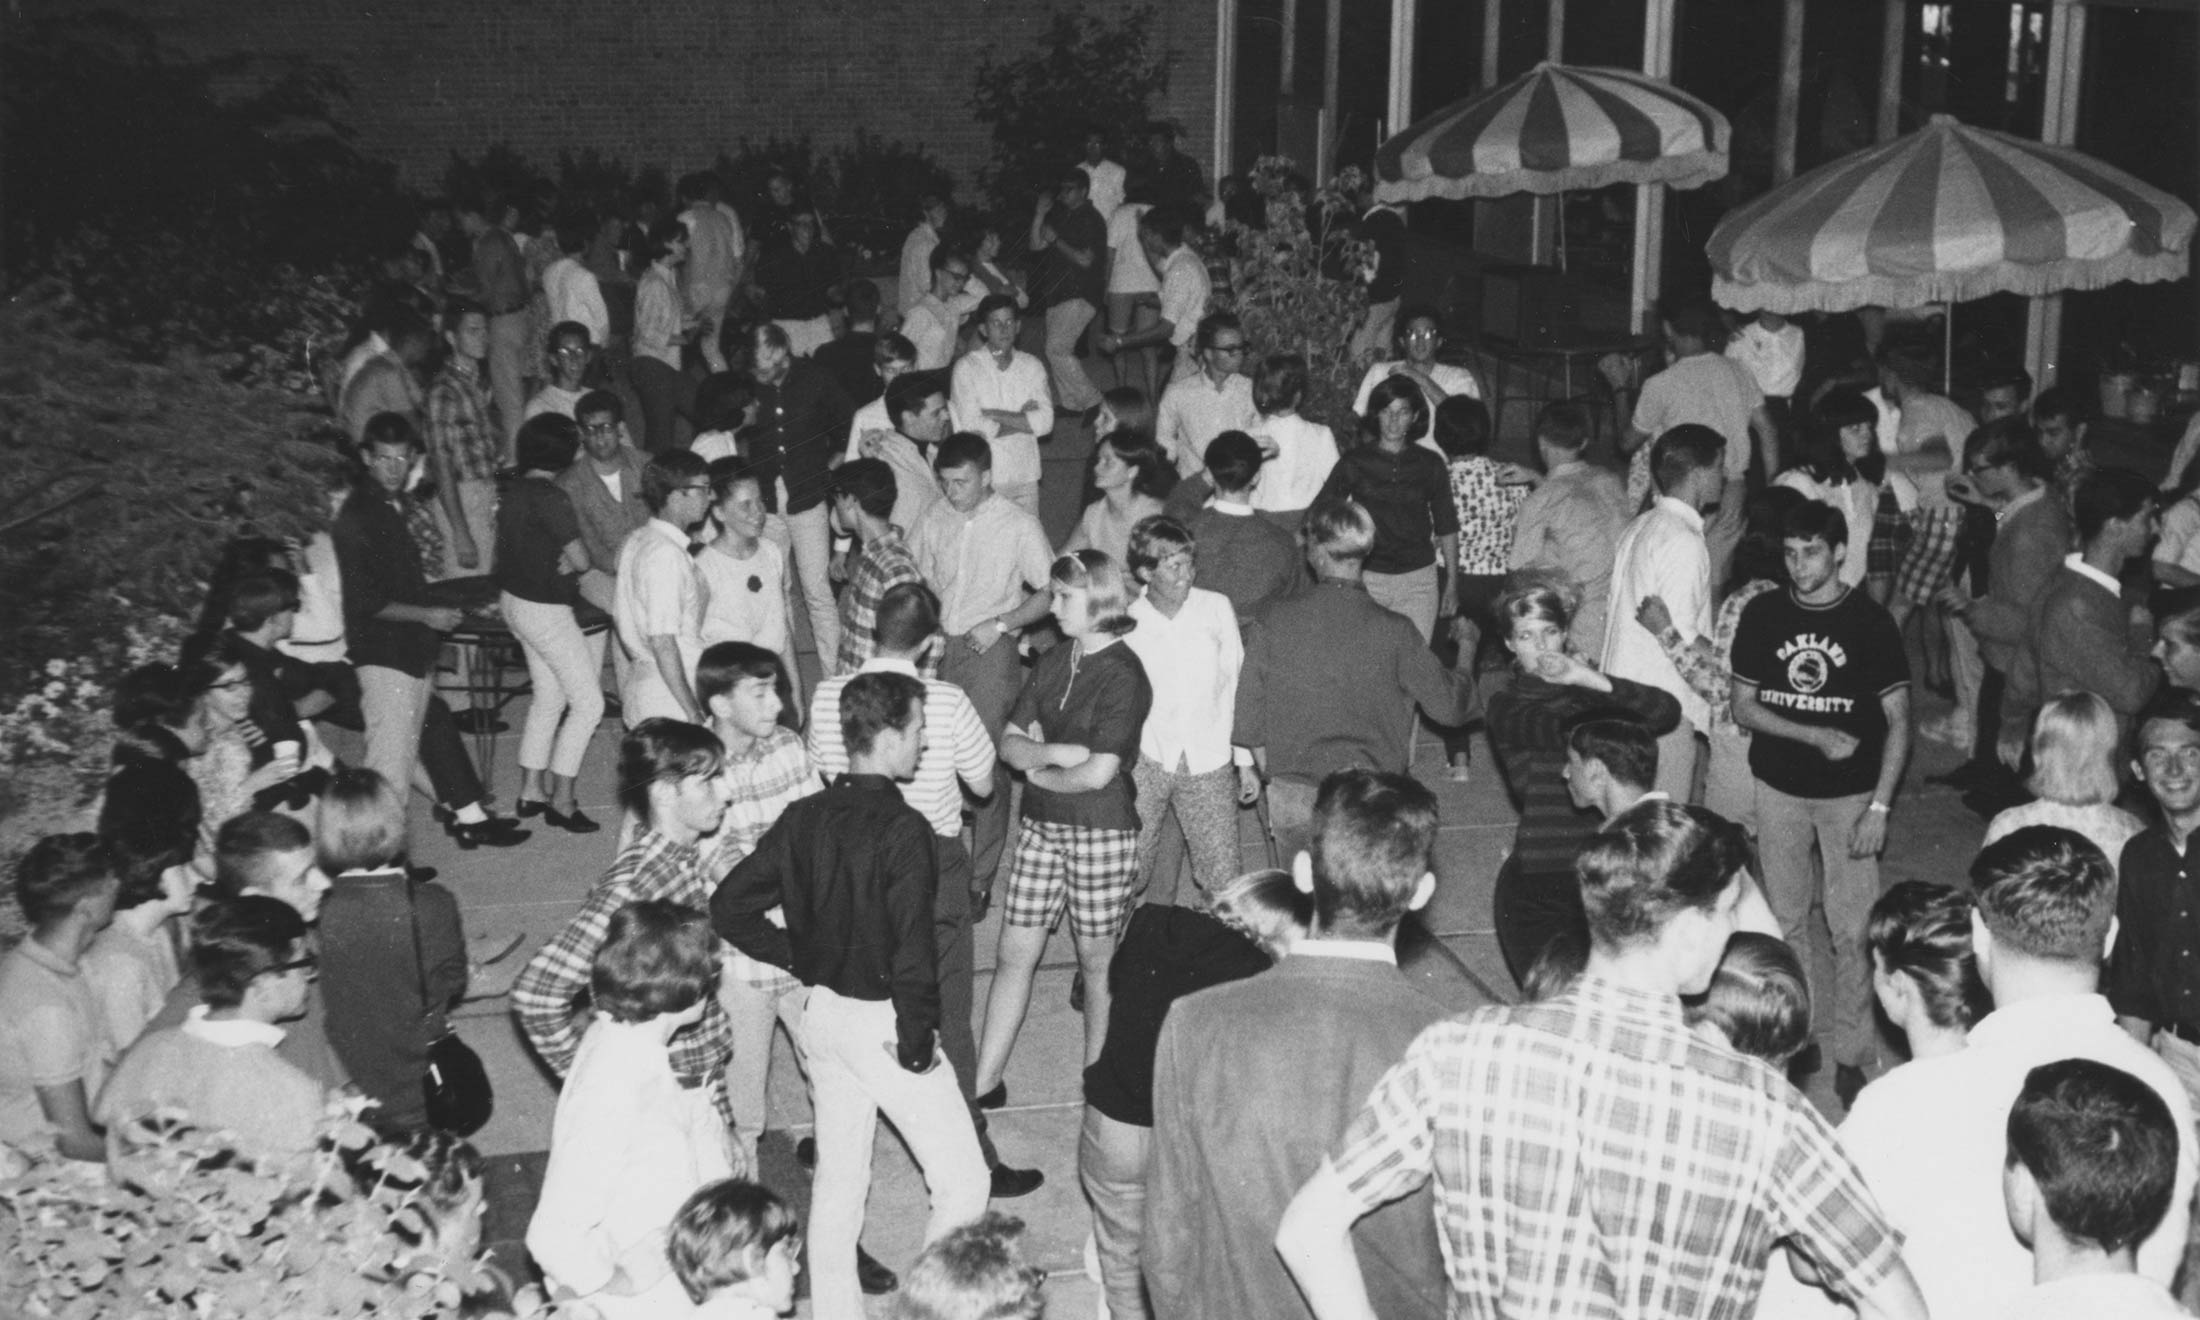 Party held on the terrance of the Oakland Center